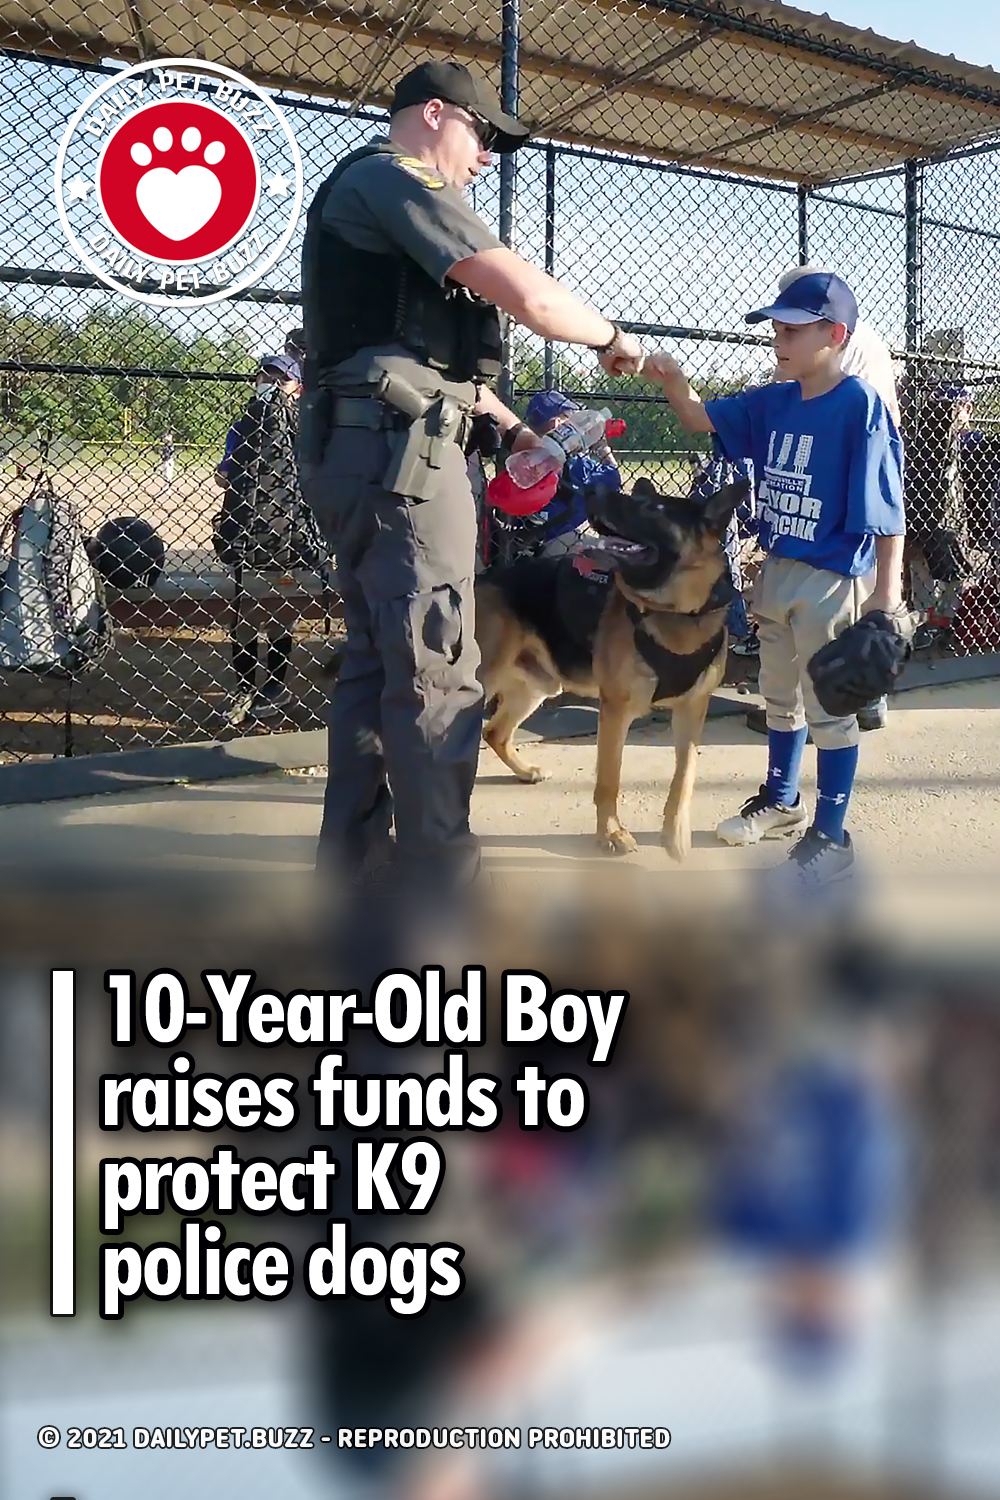 10-Year-Old Boy raises funds to protect K9 police dogs